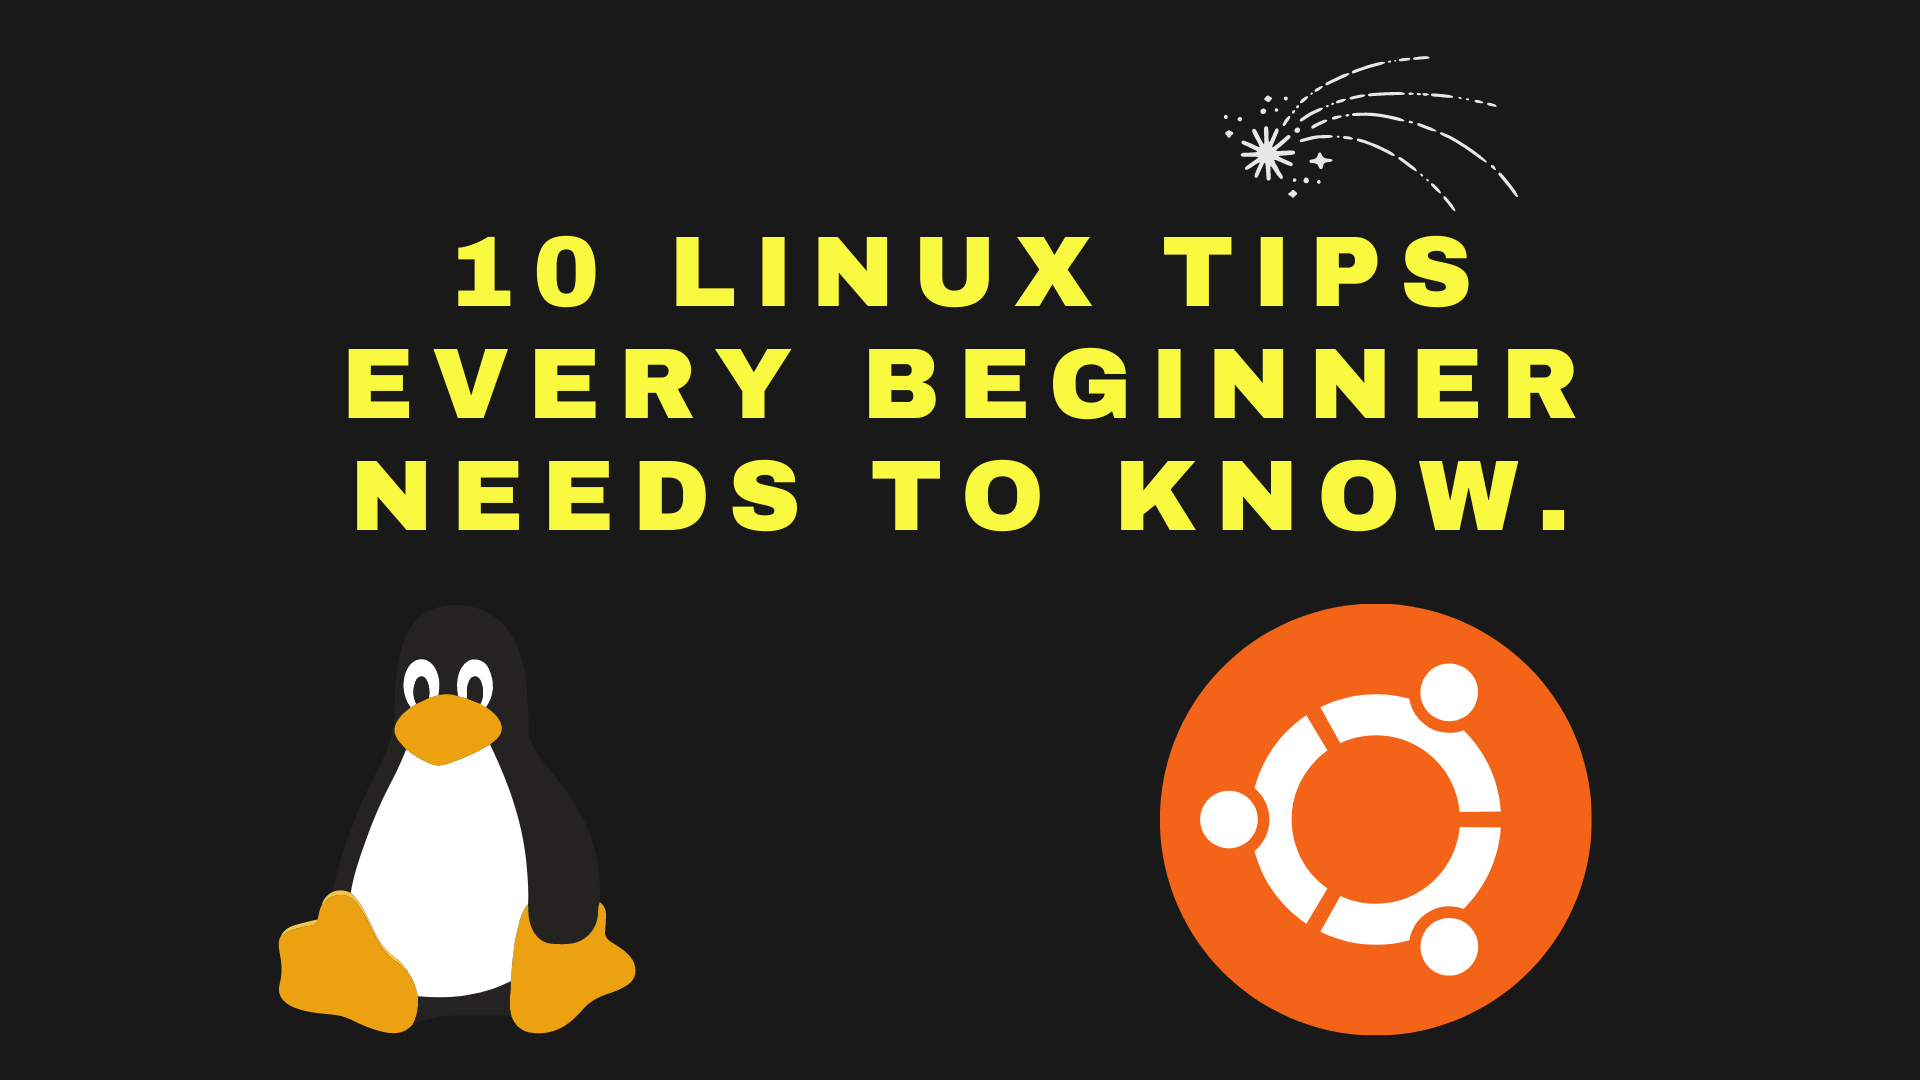 Cover Image for 10 Linux Tips Every Beginner Needs To Know.